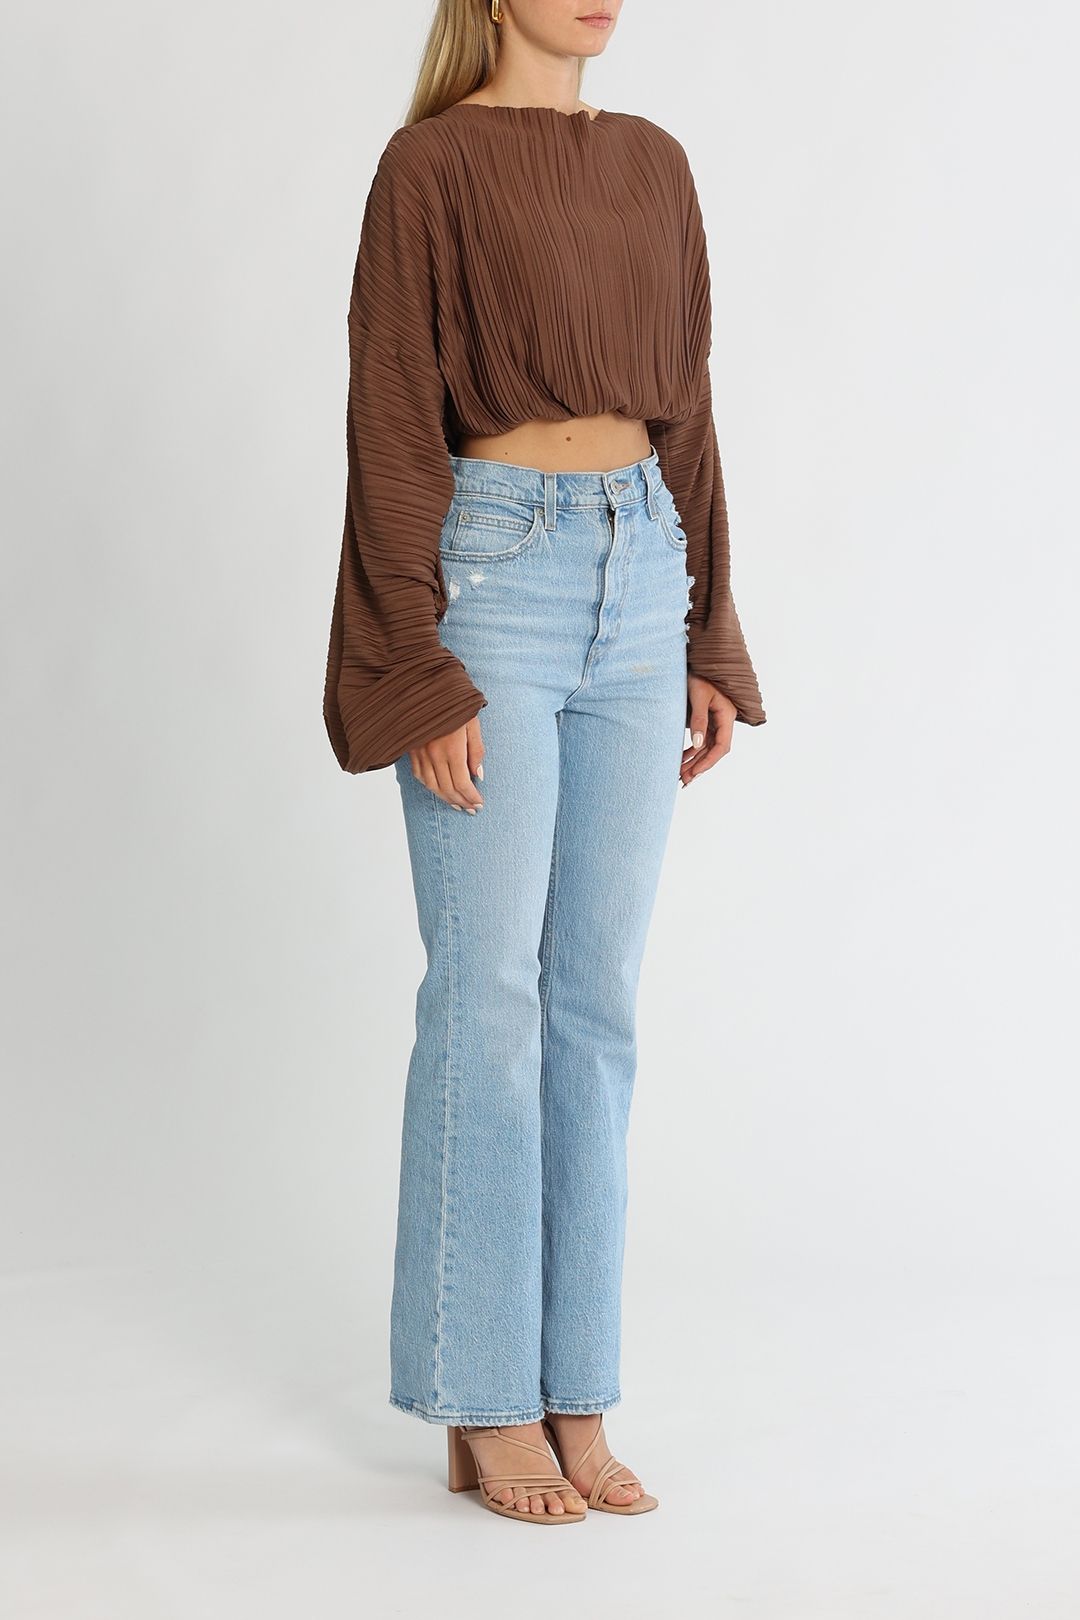 Significant Other Adeline Top Chocolate Cropped